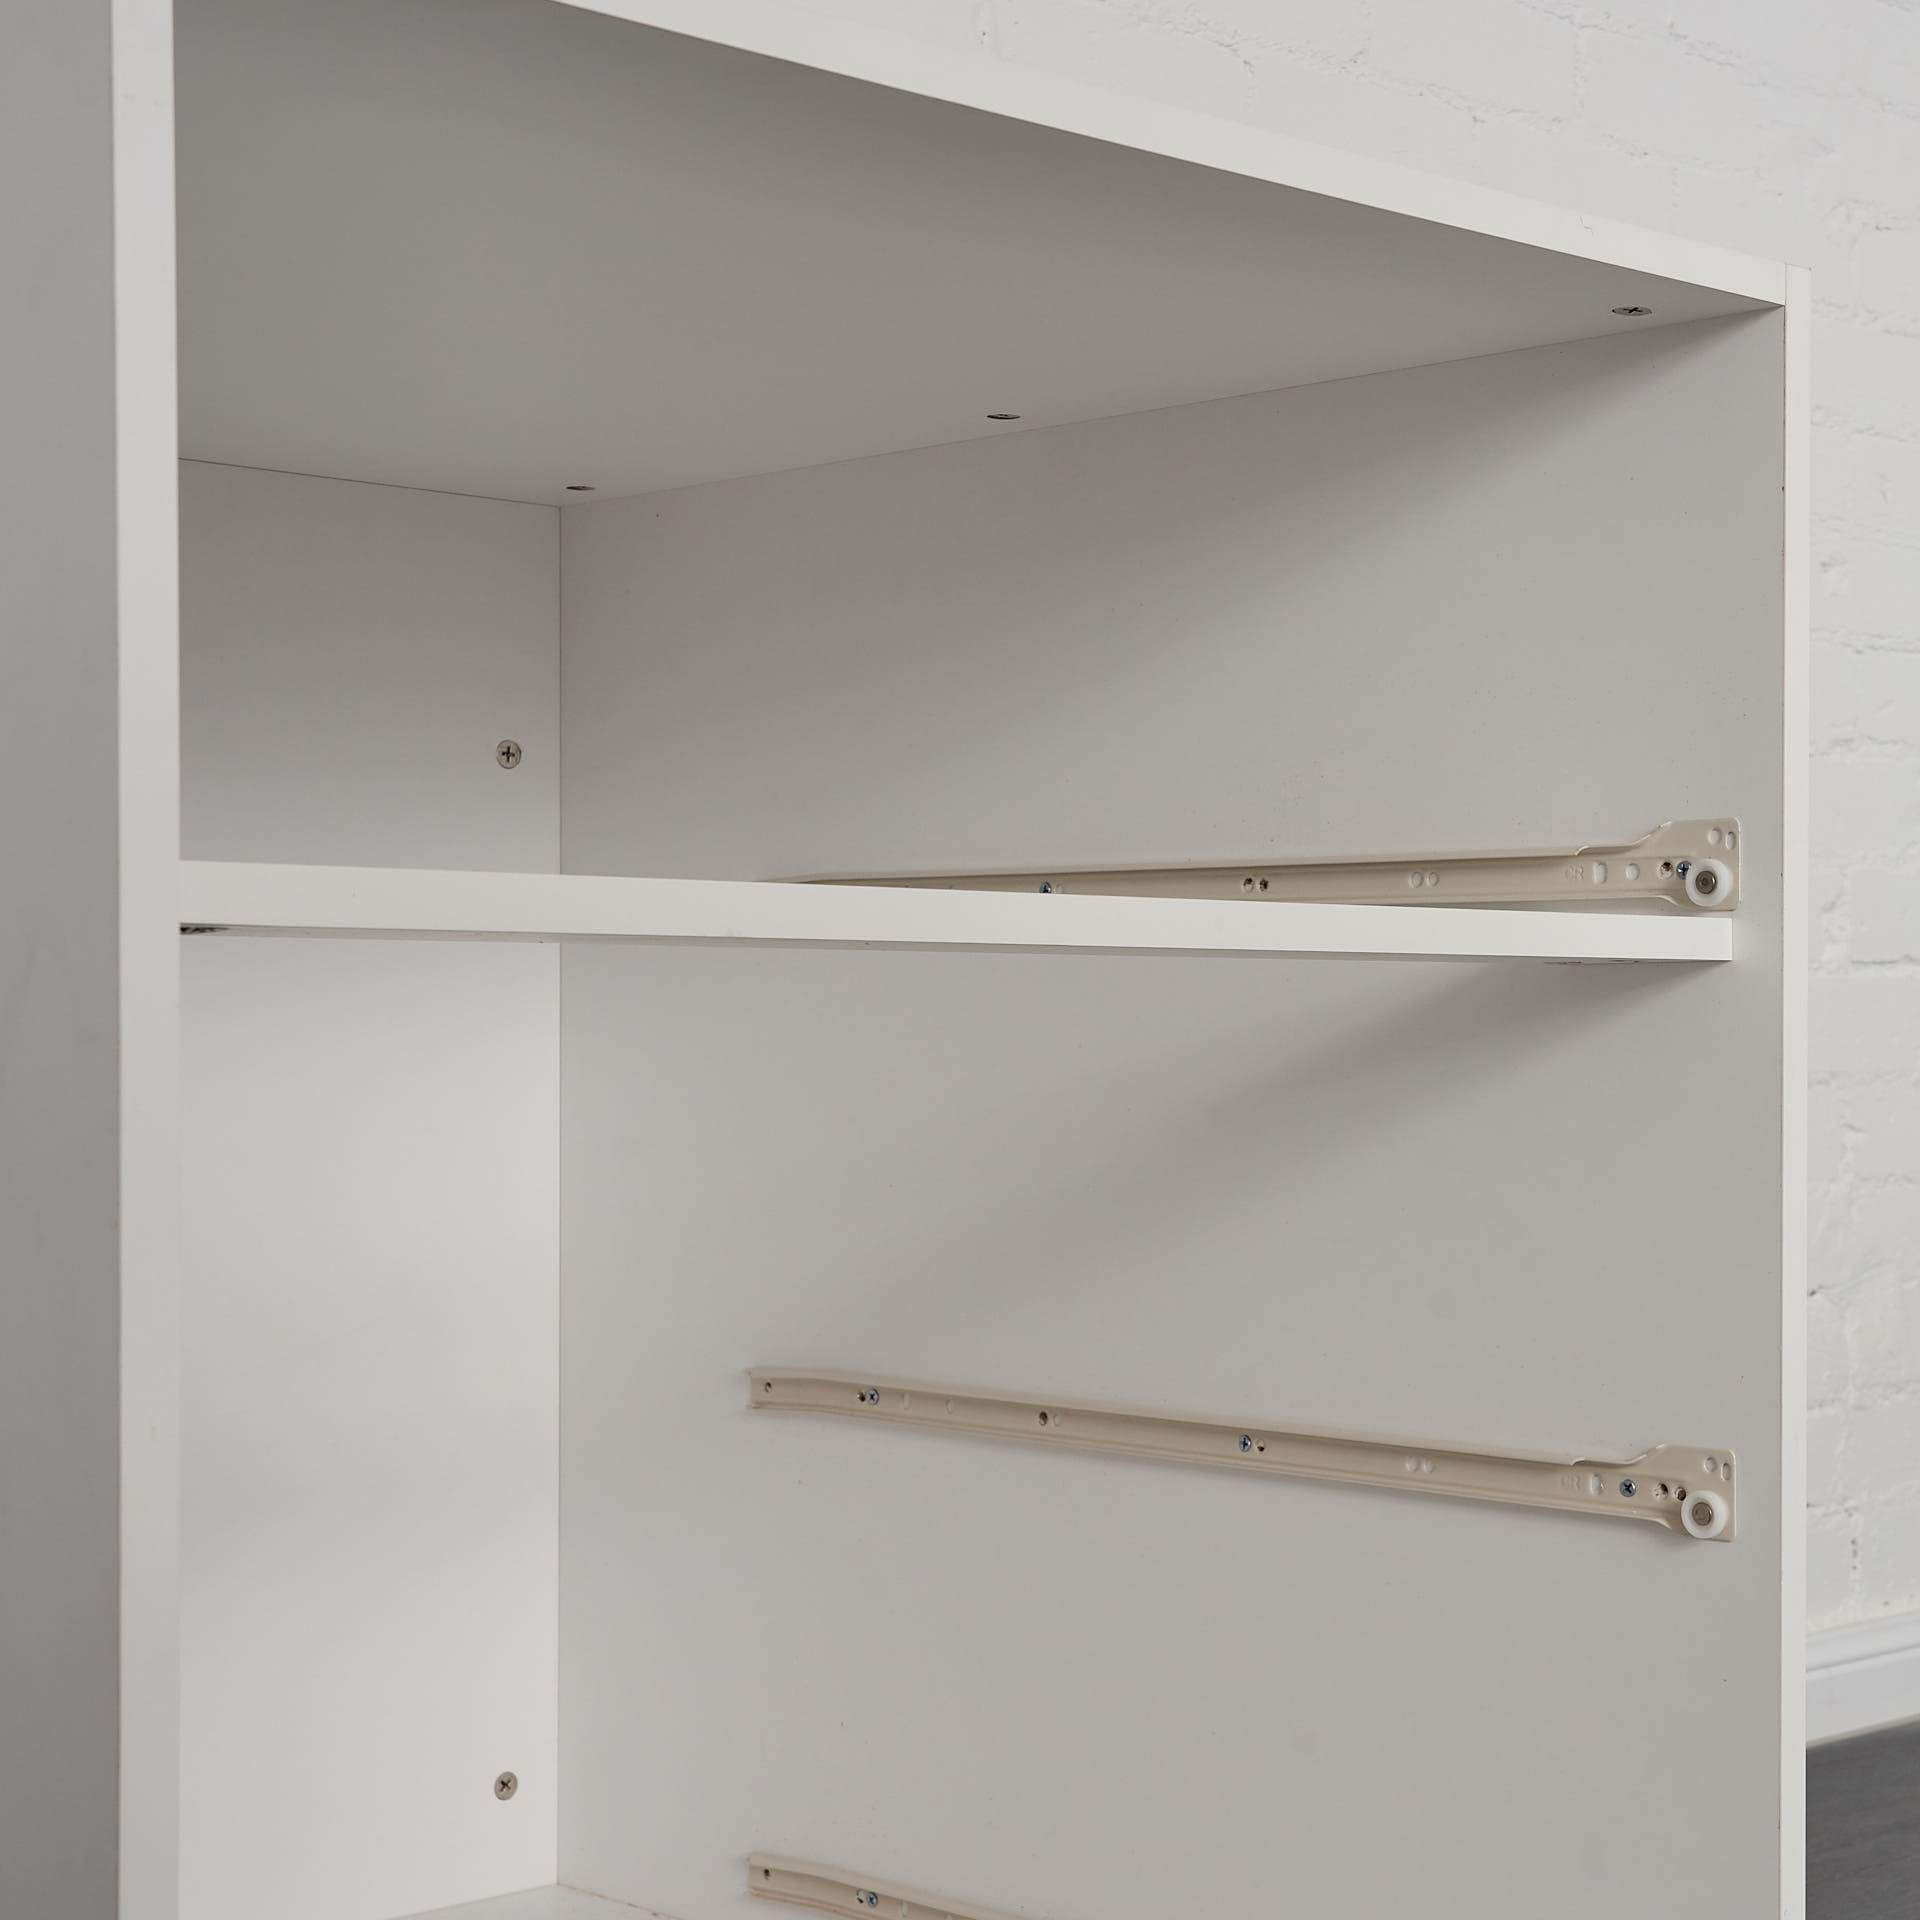 Low height bunk bed storage drawers internal view. Pictured in white.